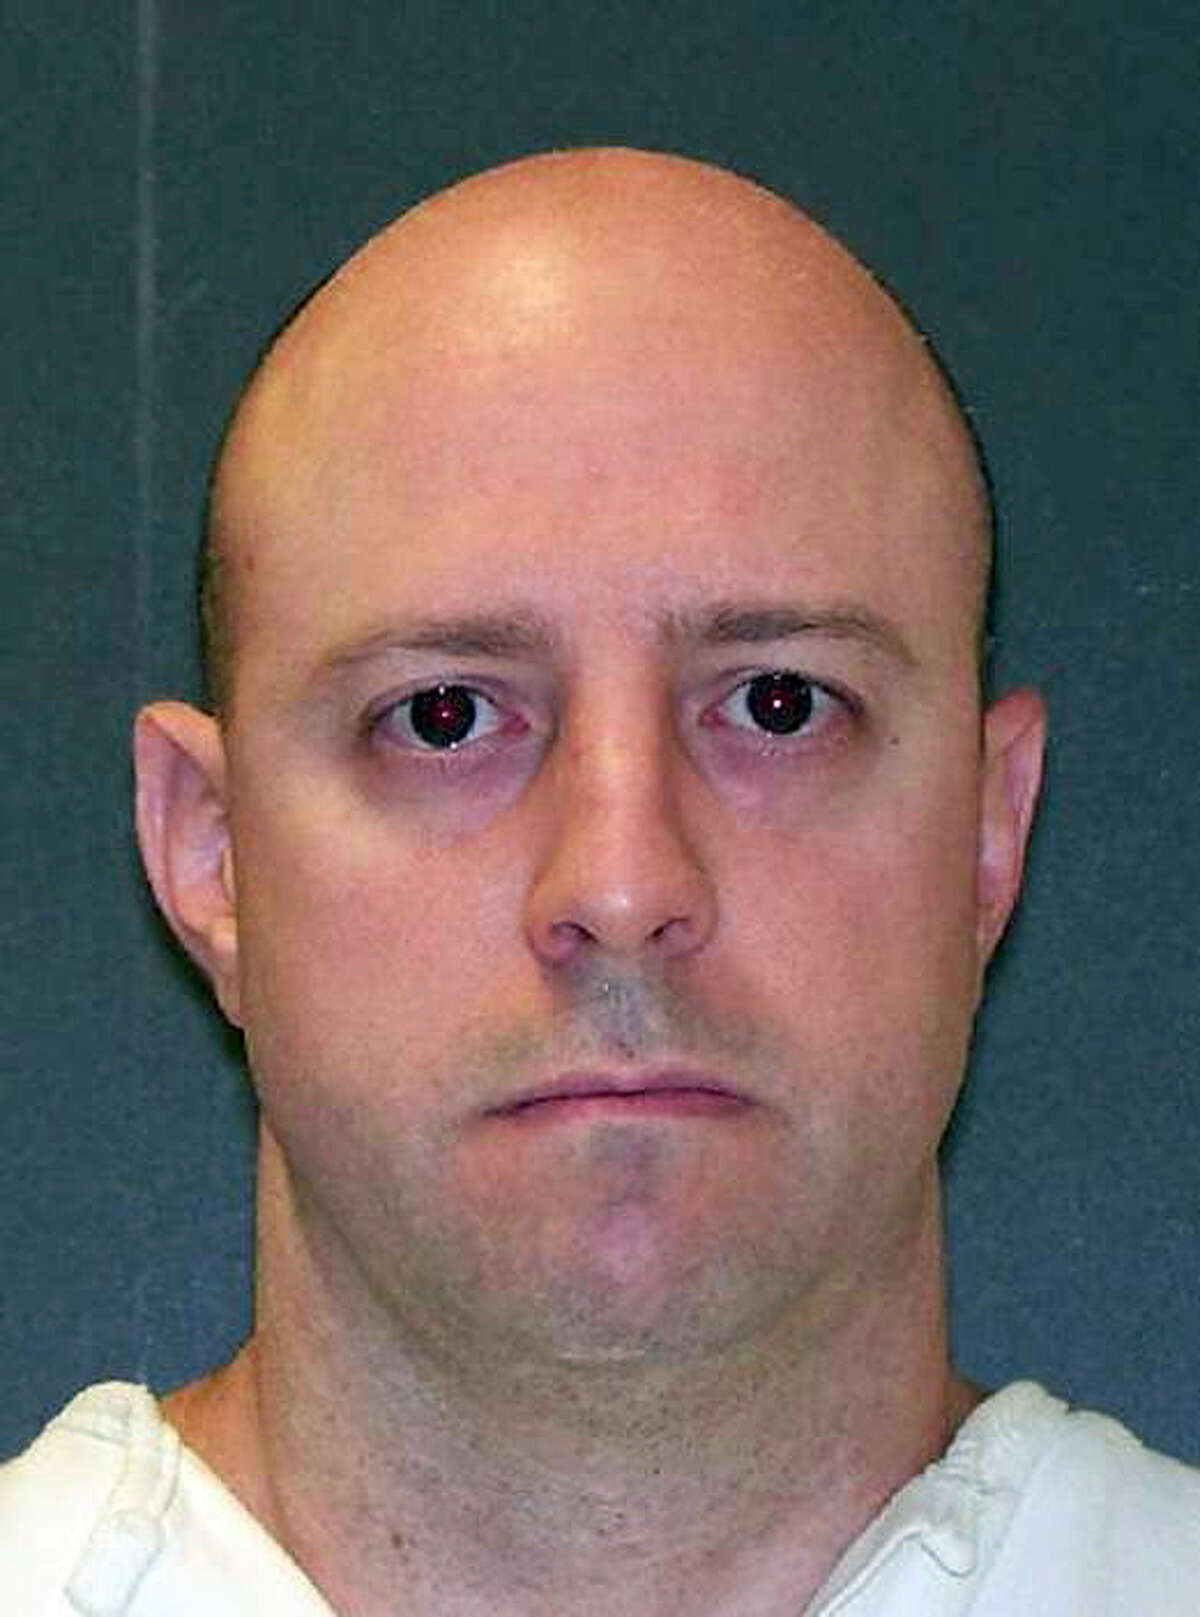 This undated photo provided by the Texas Department of Criminal Justice shows Texas inmate James Freeman. On Wednesday, Jan. 27, 2016, Freeman, 34, was set to die for killing Texas Parks and Wildlife Game Warden Justin Hurst during a March 17, 2007 a shootout. (Texas Department of Criminal Justice via AP)